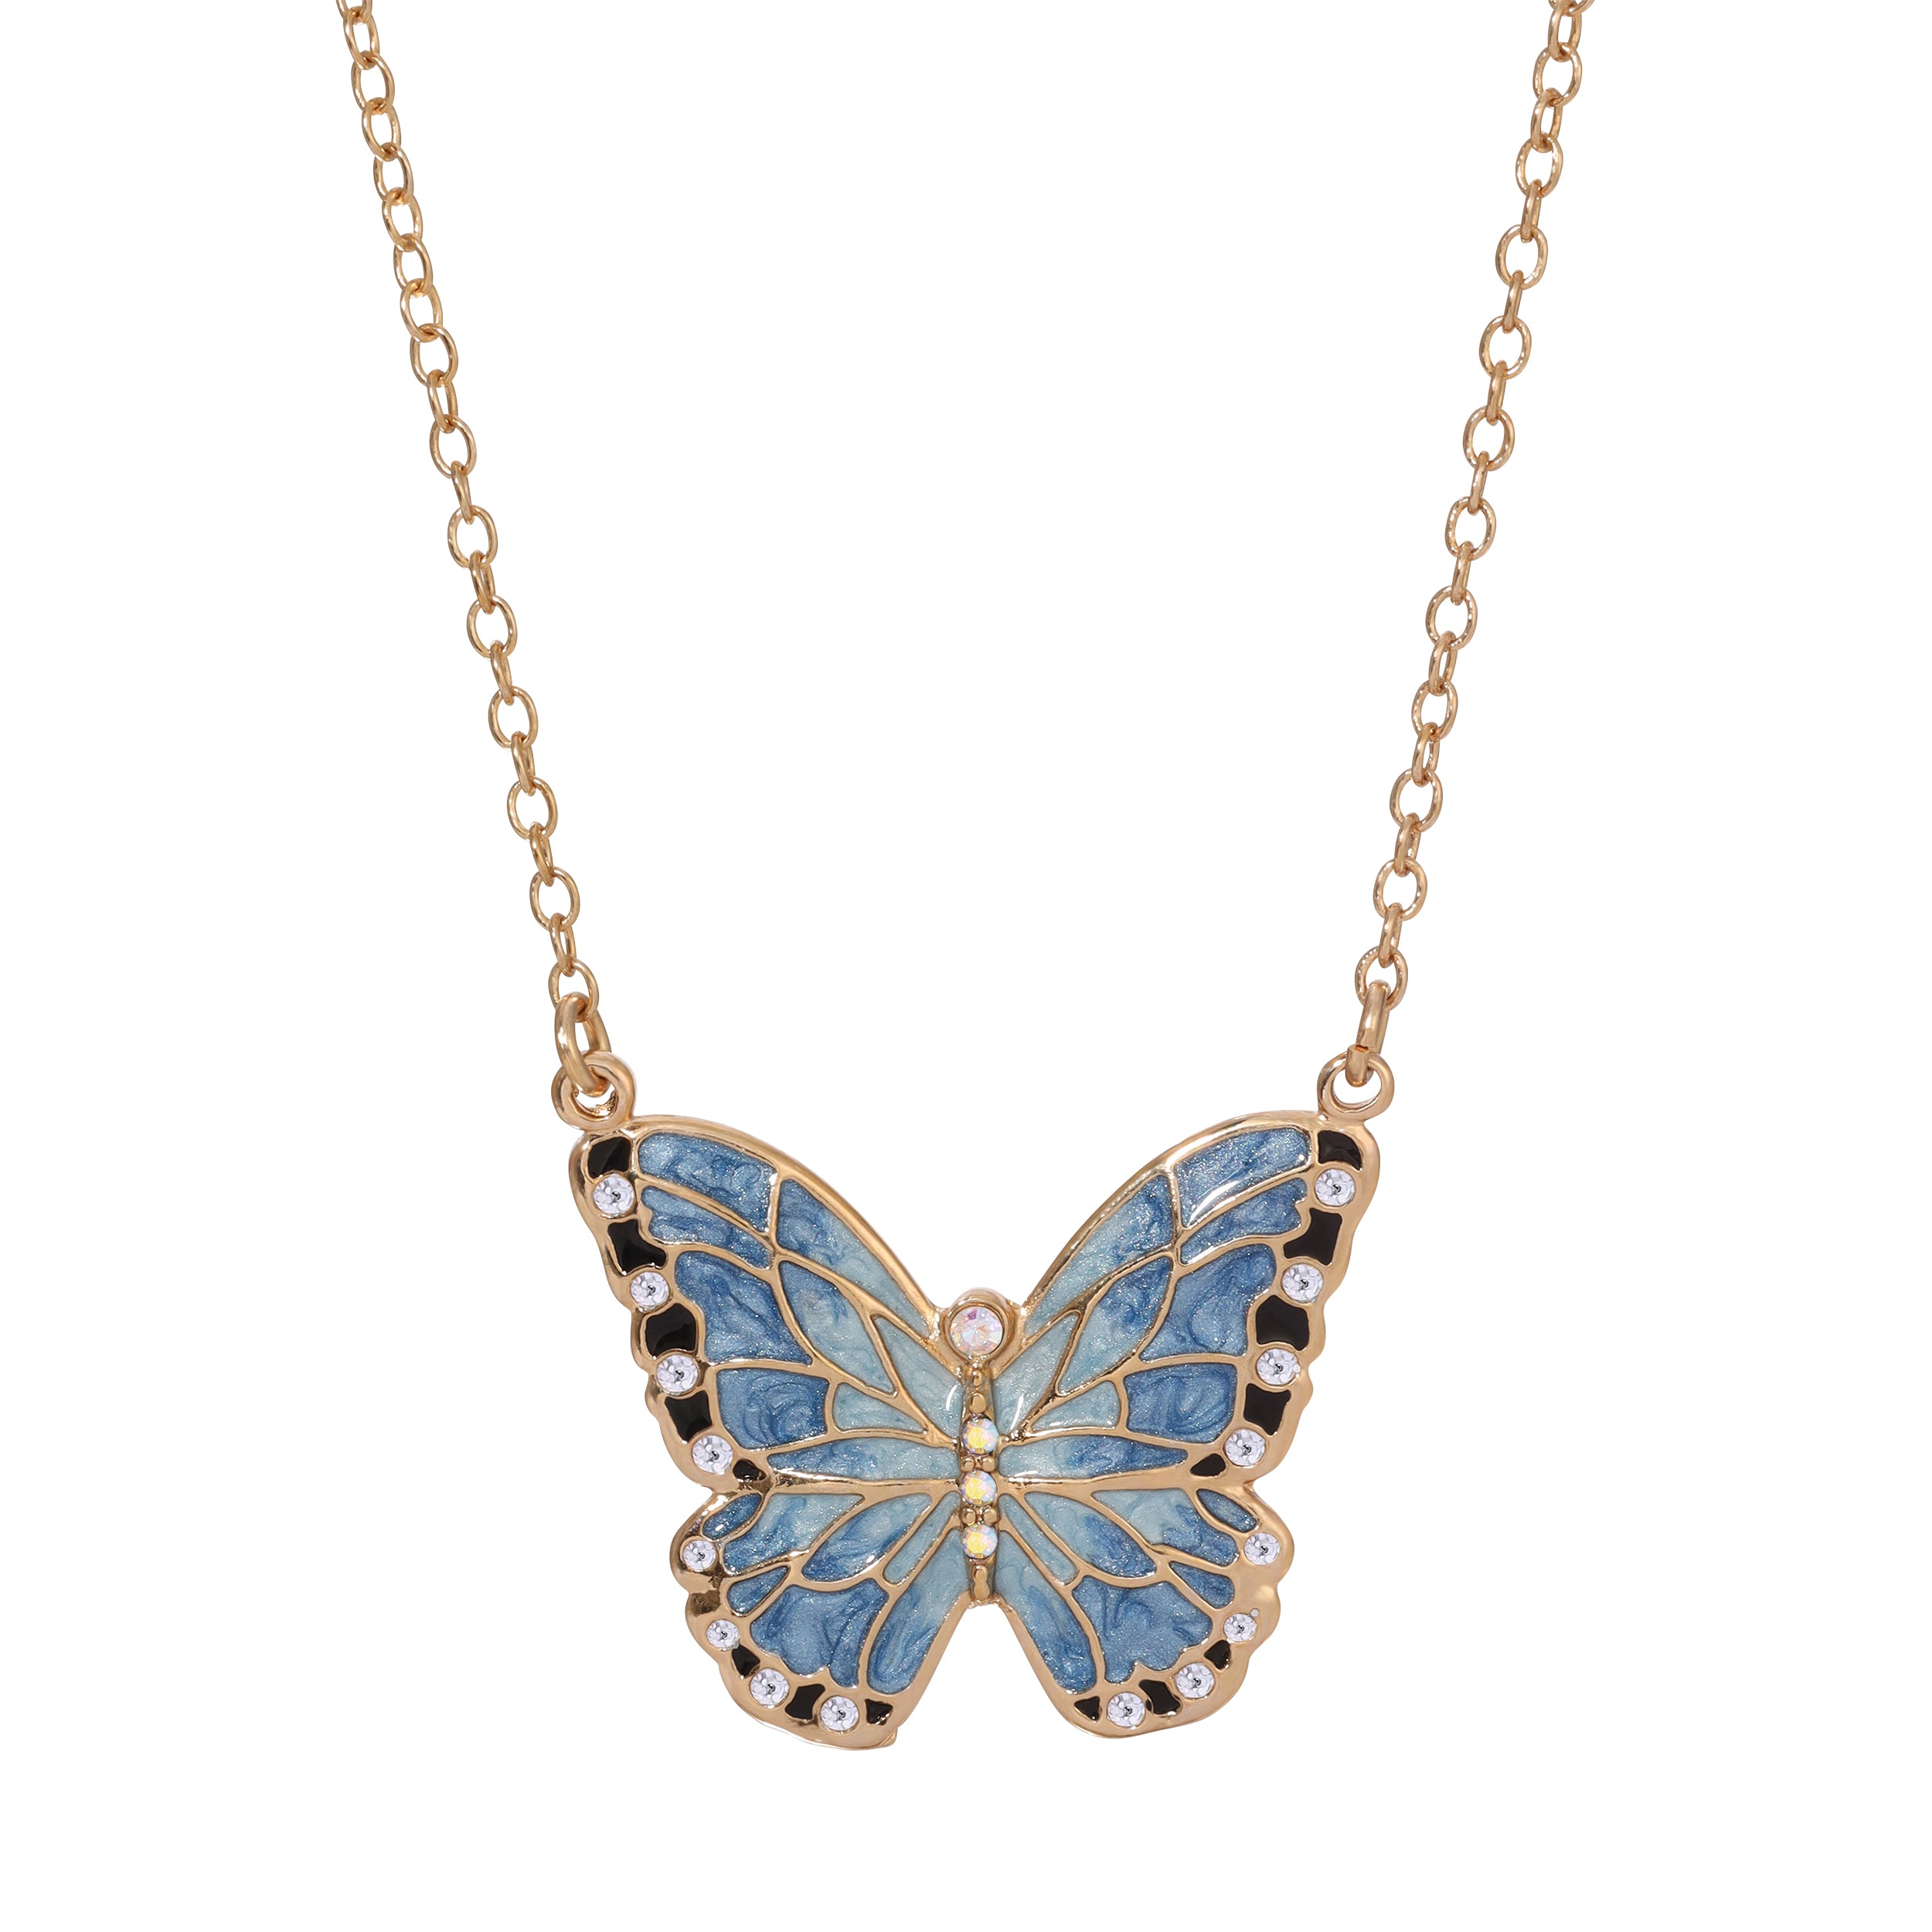 Gucci Multicolor Crystal Butterfly Pendant Necklace | Rent Gucci jewelry  for $55/month